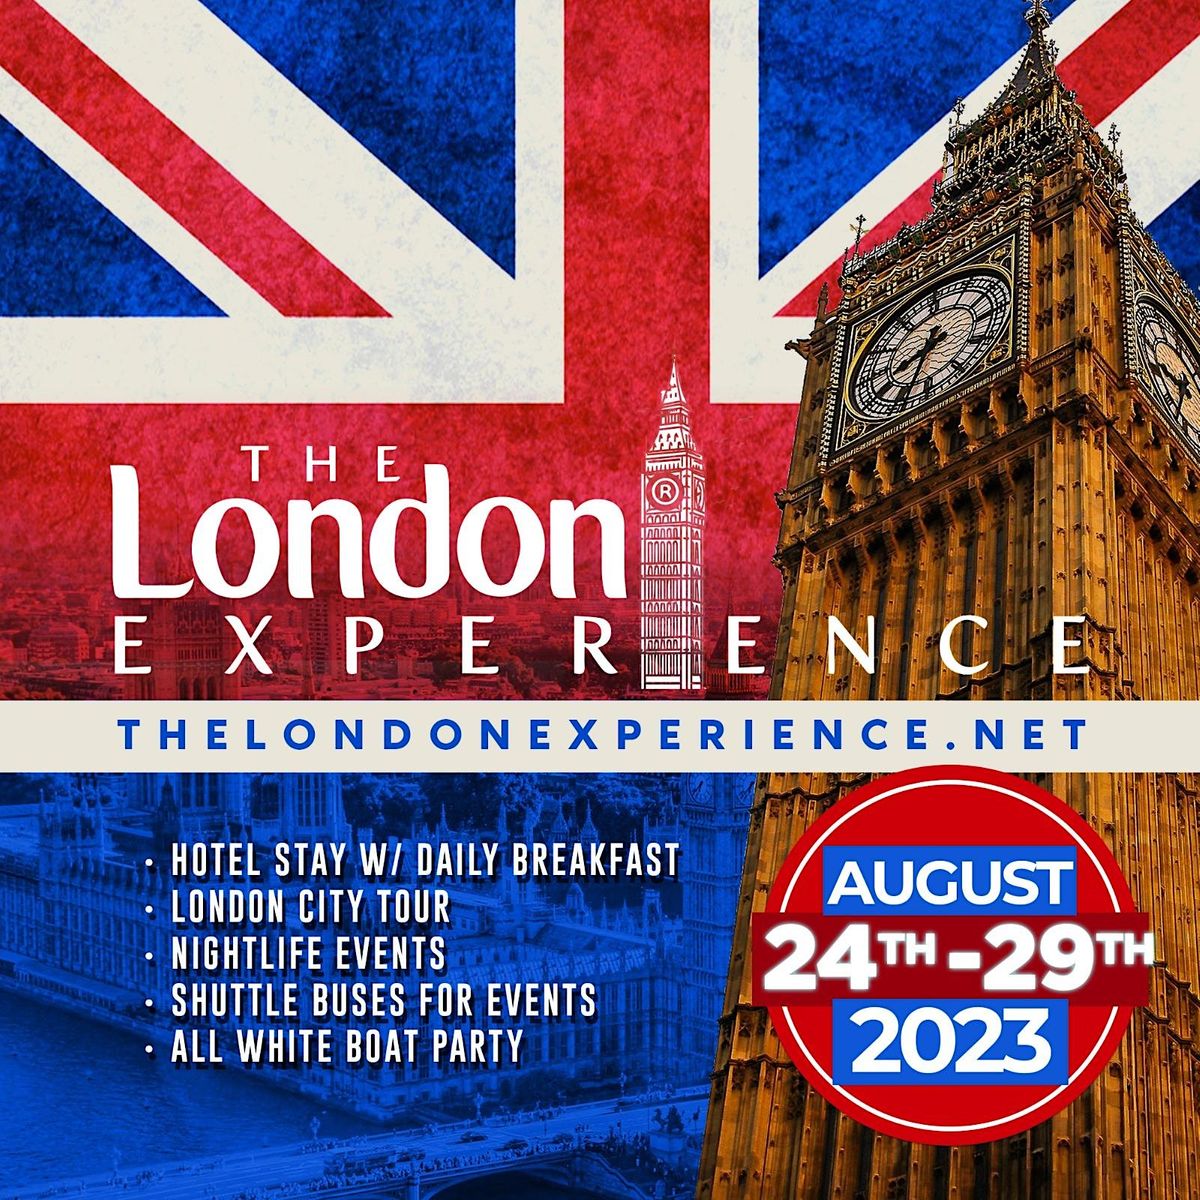 THE LONDON EXPERIENCE  August 24 - 29, 2023  - Notting Hill Carnival